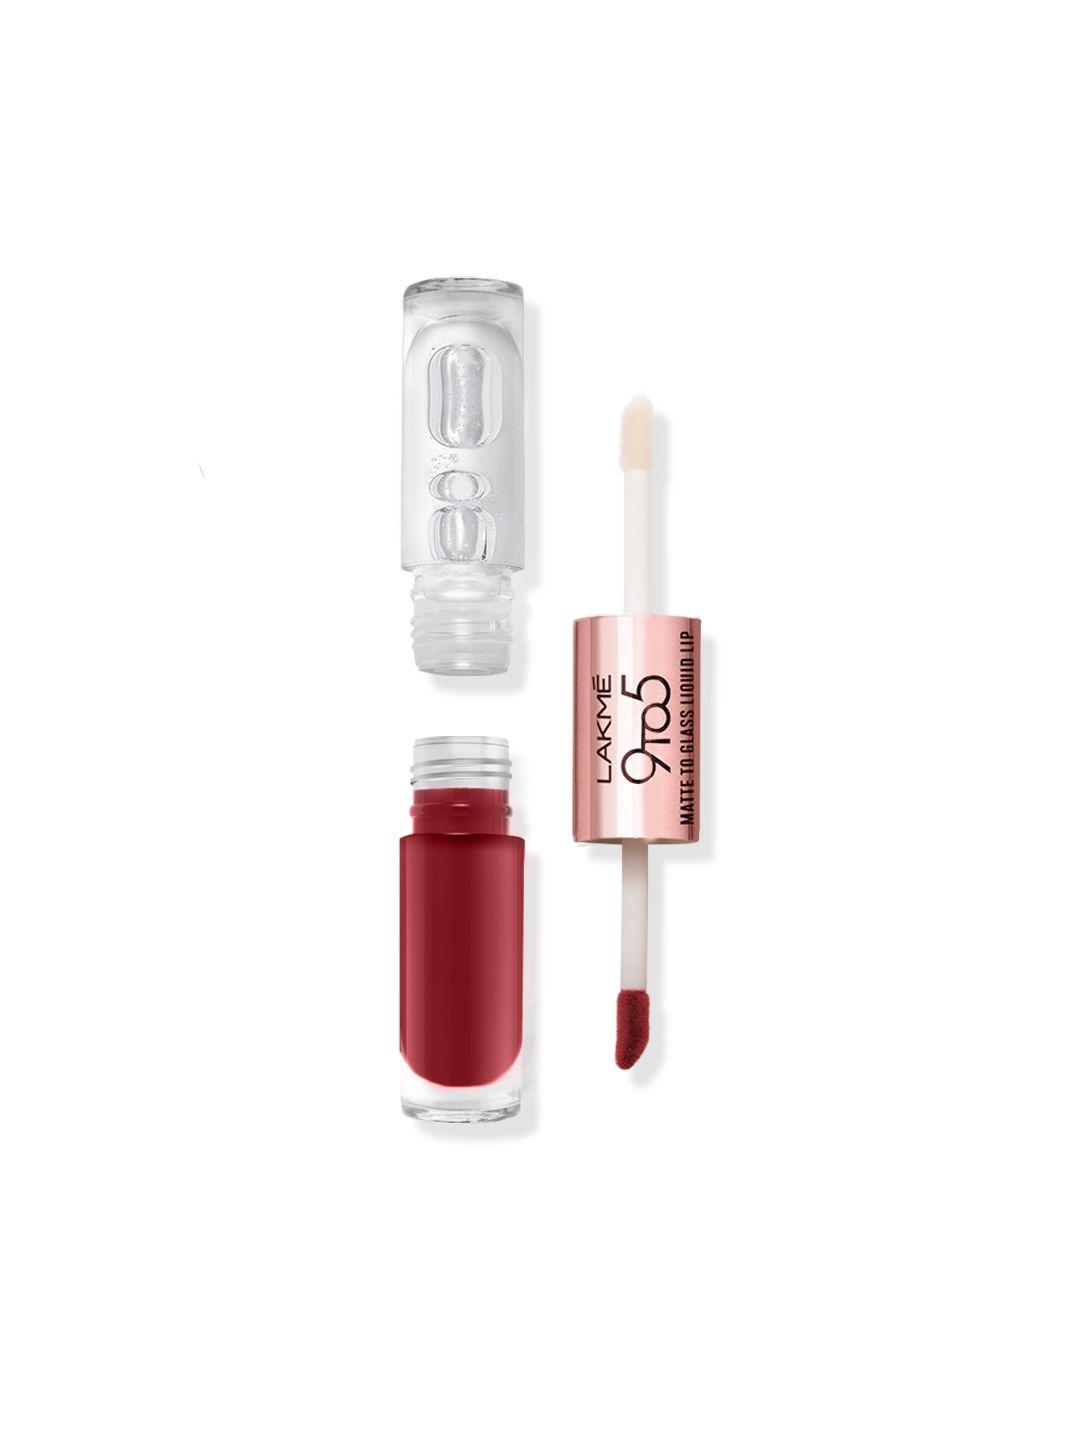 lakme 9to5 matte to glass transfer-proof liquid lip color 7.6ml - vintage red